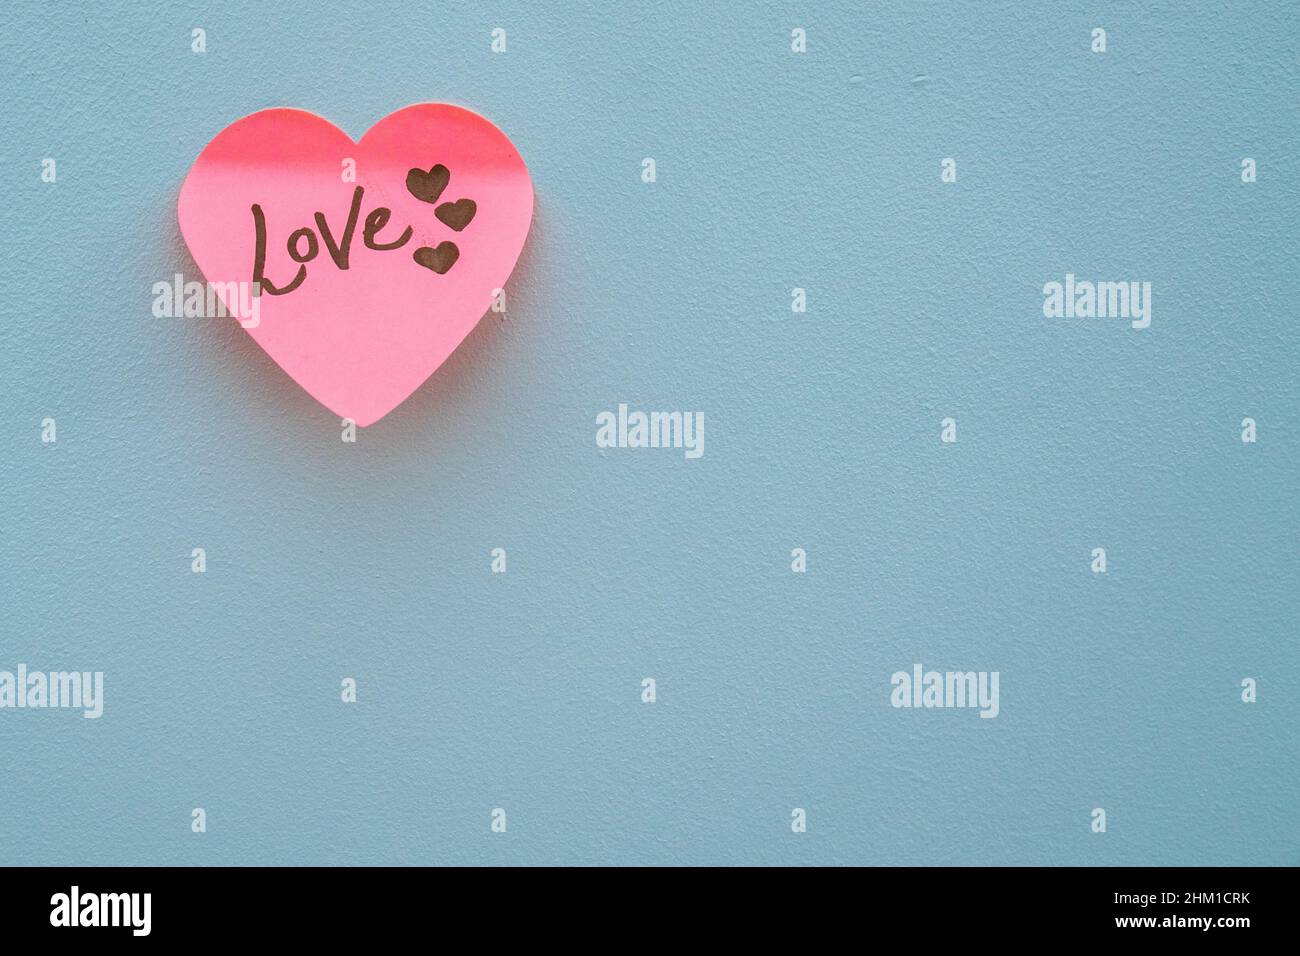 Love hand wrote text on pink love heart with drawn hearts. On white isolated background. Love Valentines concept. Stock Photo